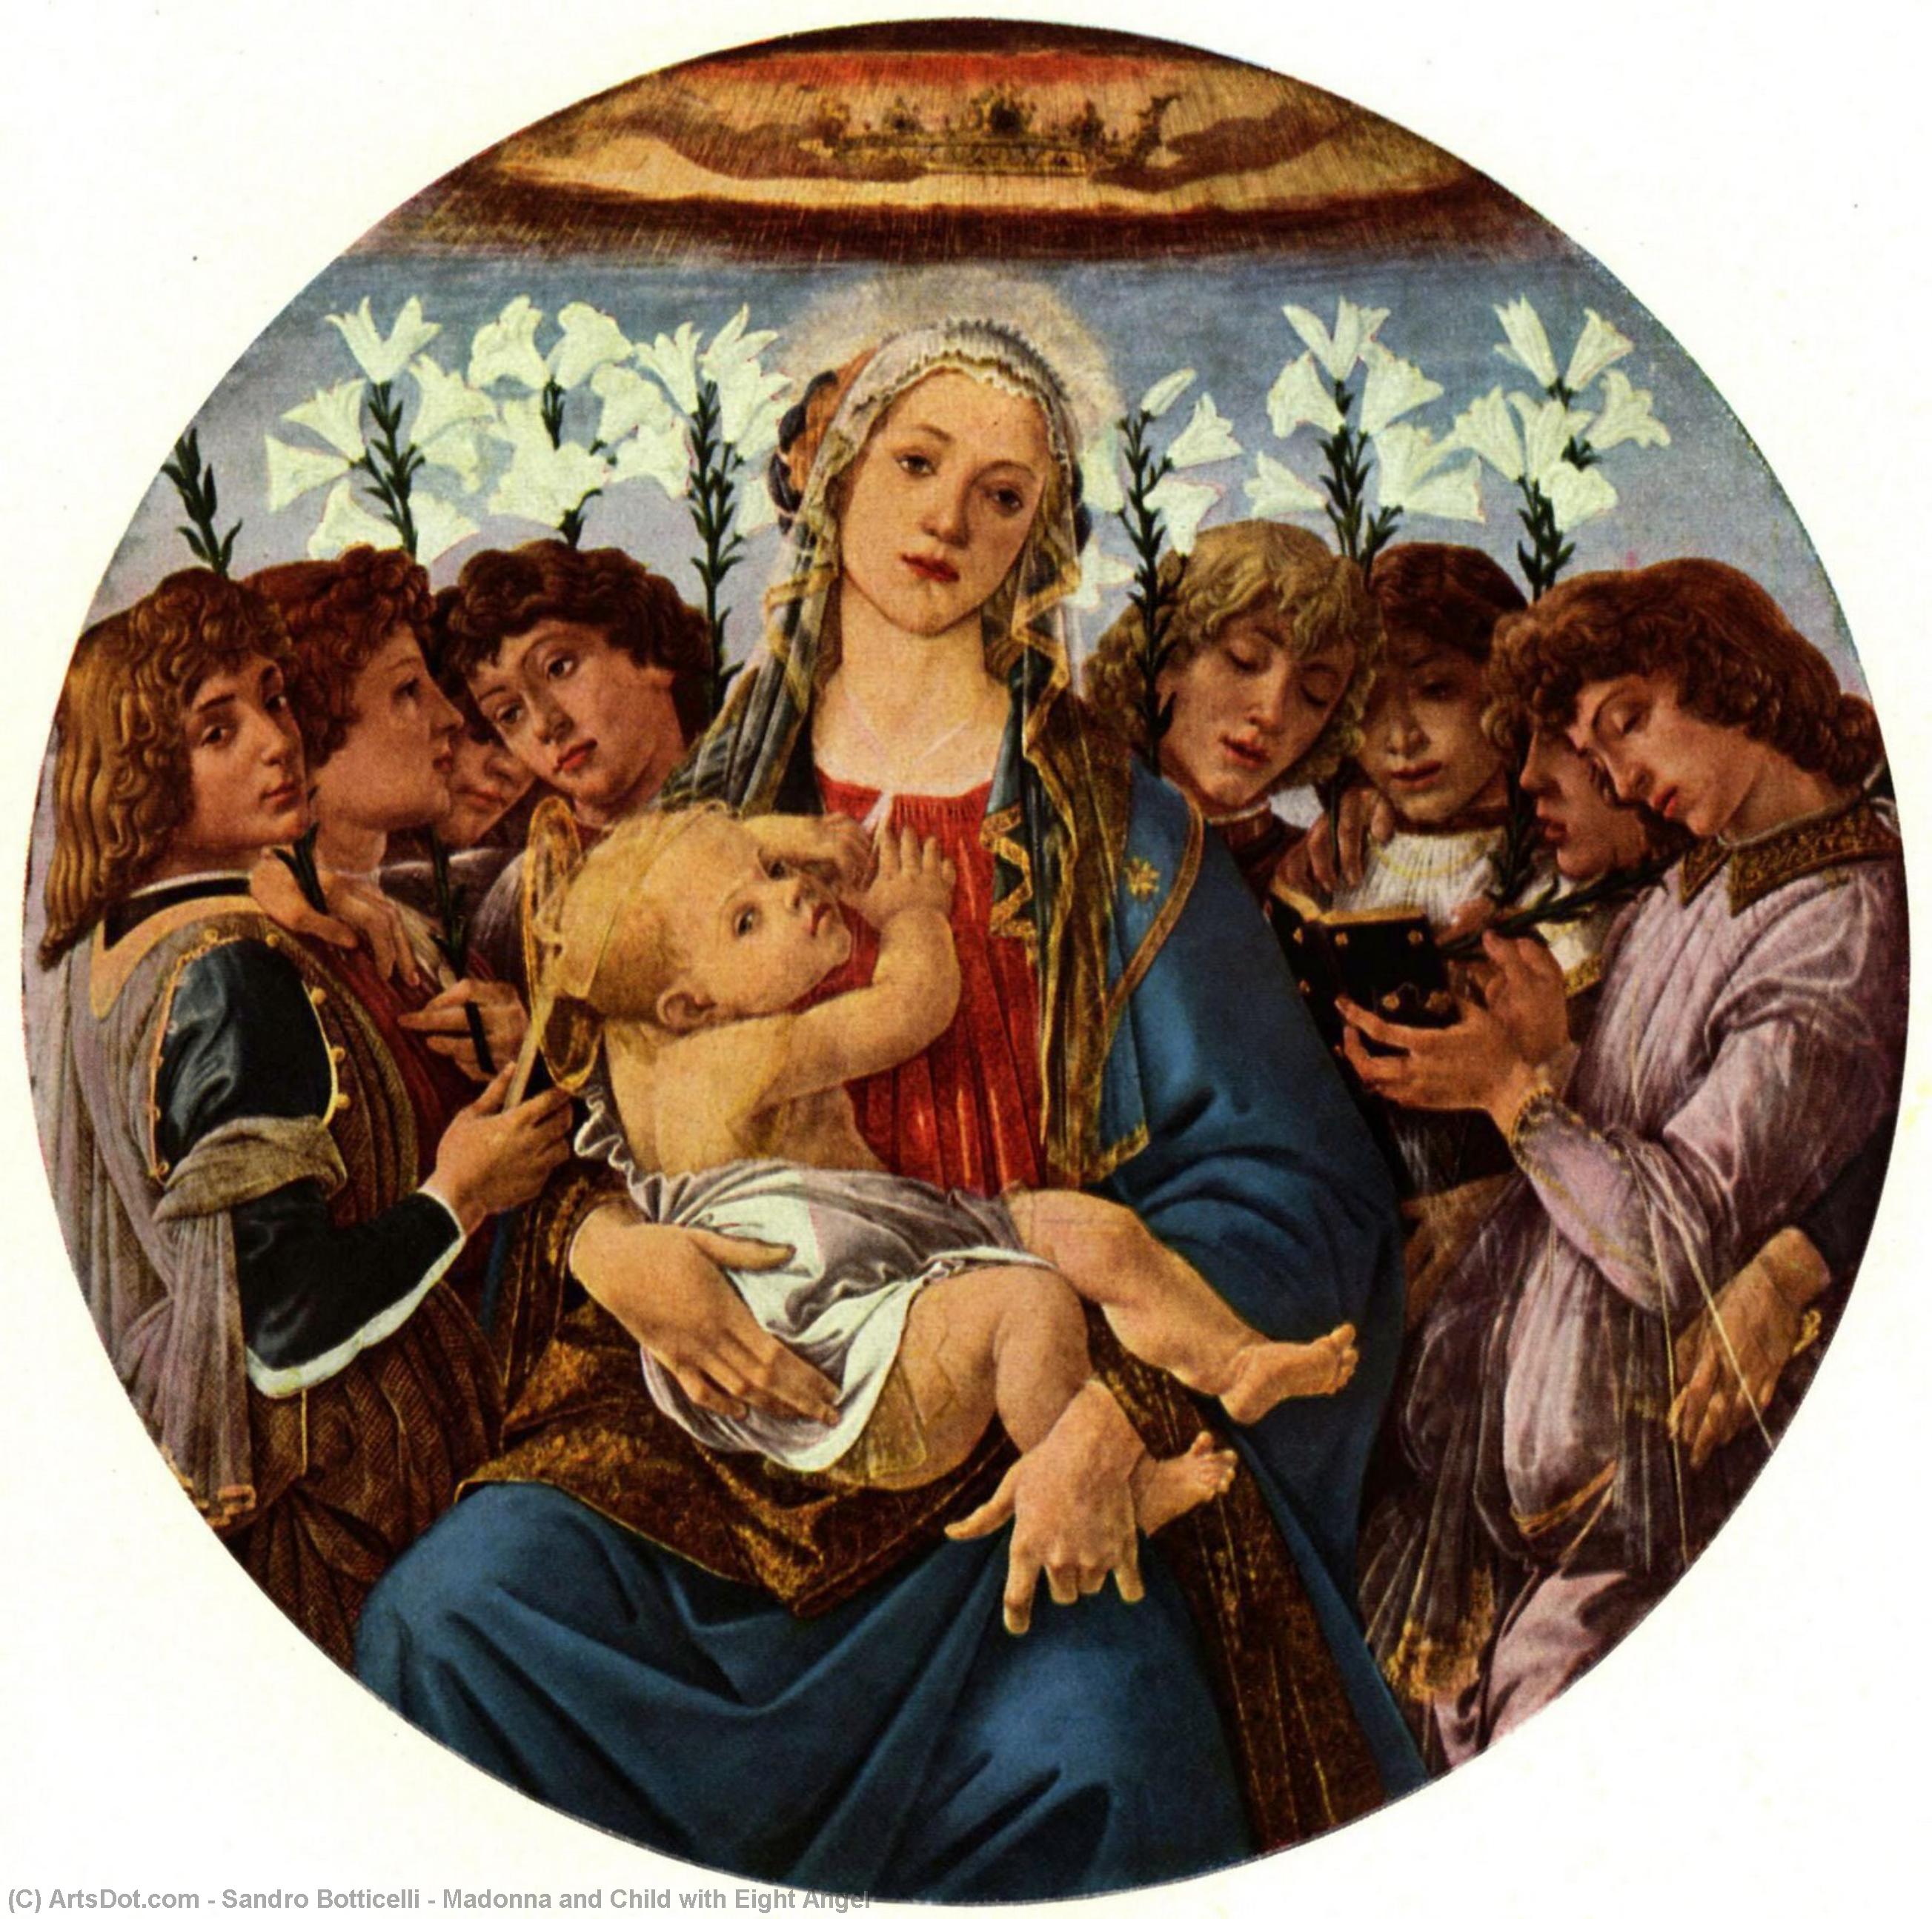 WikiOO.org - Encyclopedia of Fine Arts - Festés, Grafika Sandro Botticelli - Madonna and Child with Eight Angel